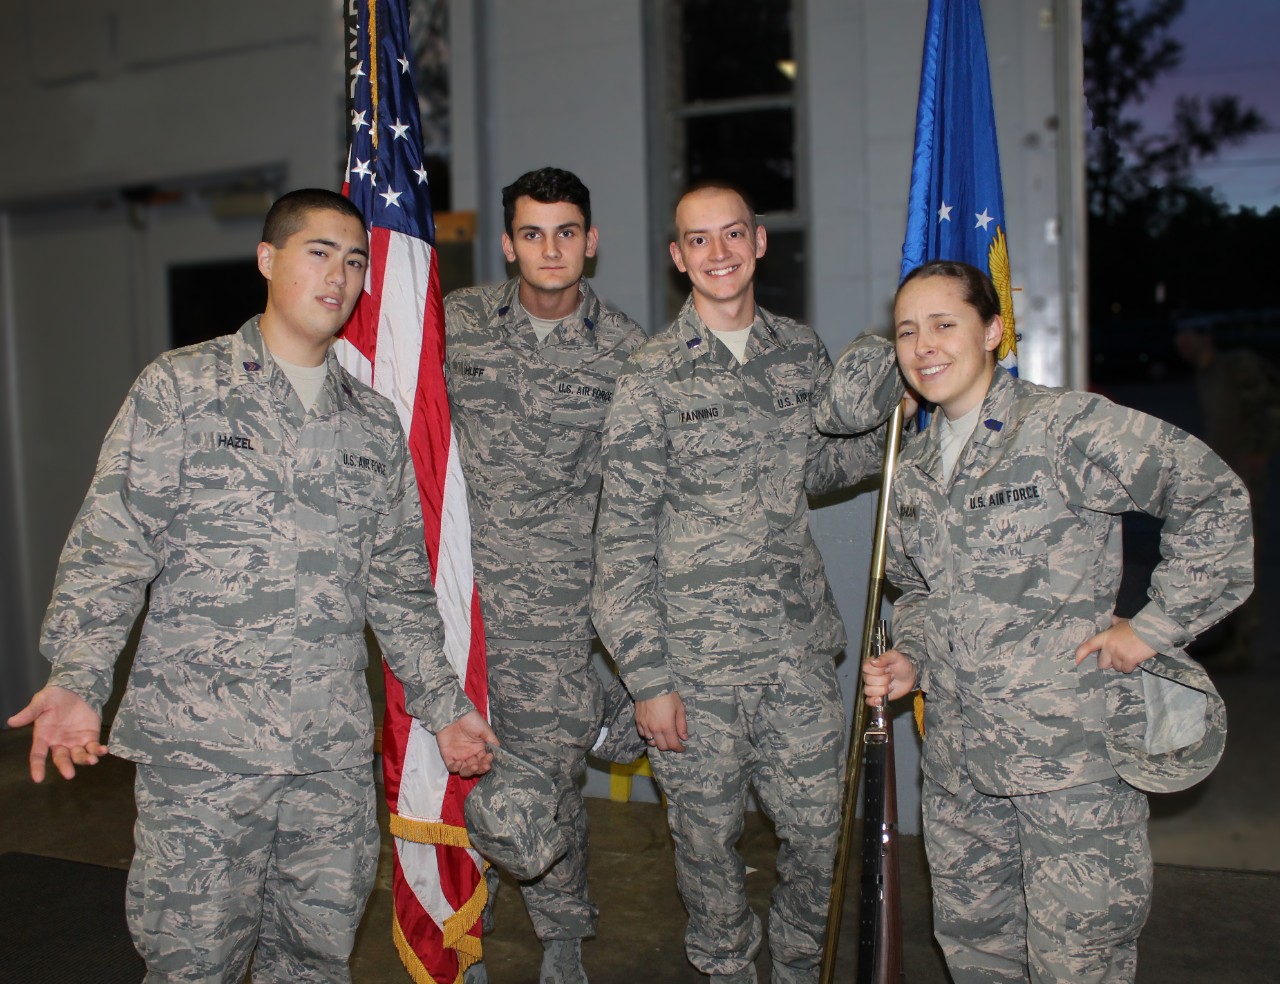 Fanning and three ROTC cadets posing with American flag, all in military camoflage attire. 